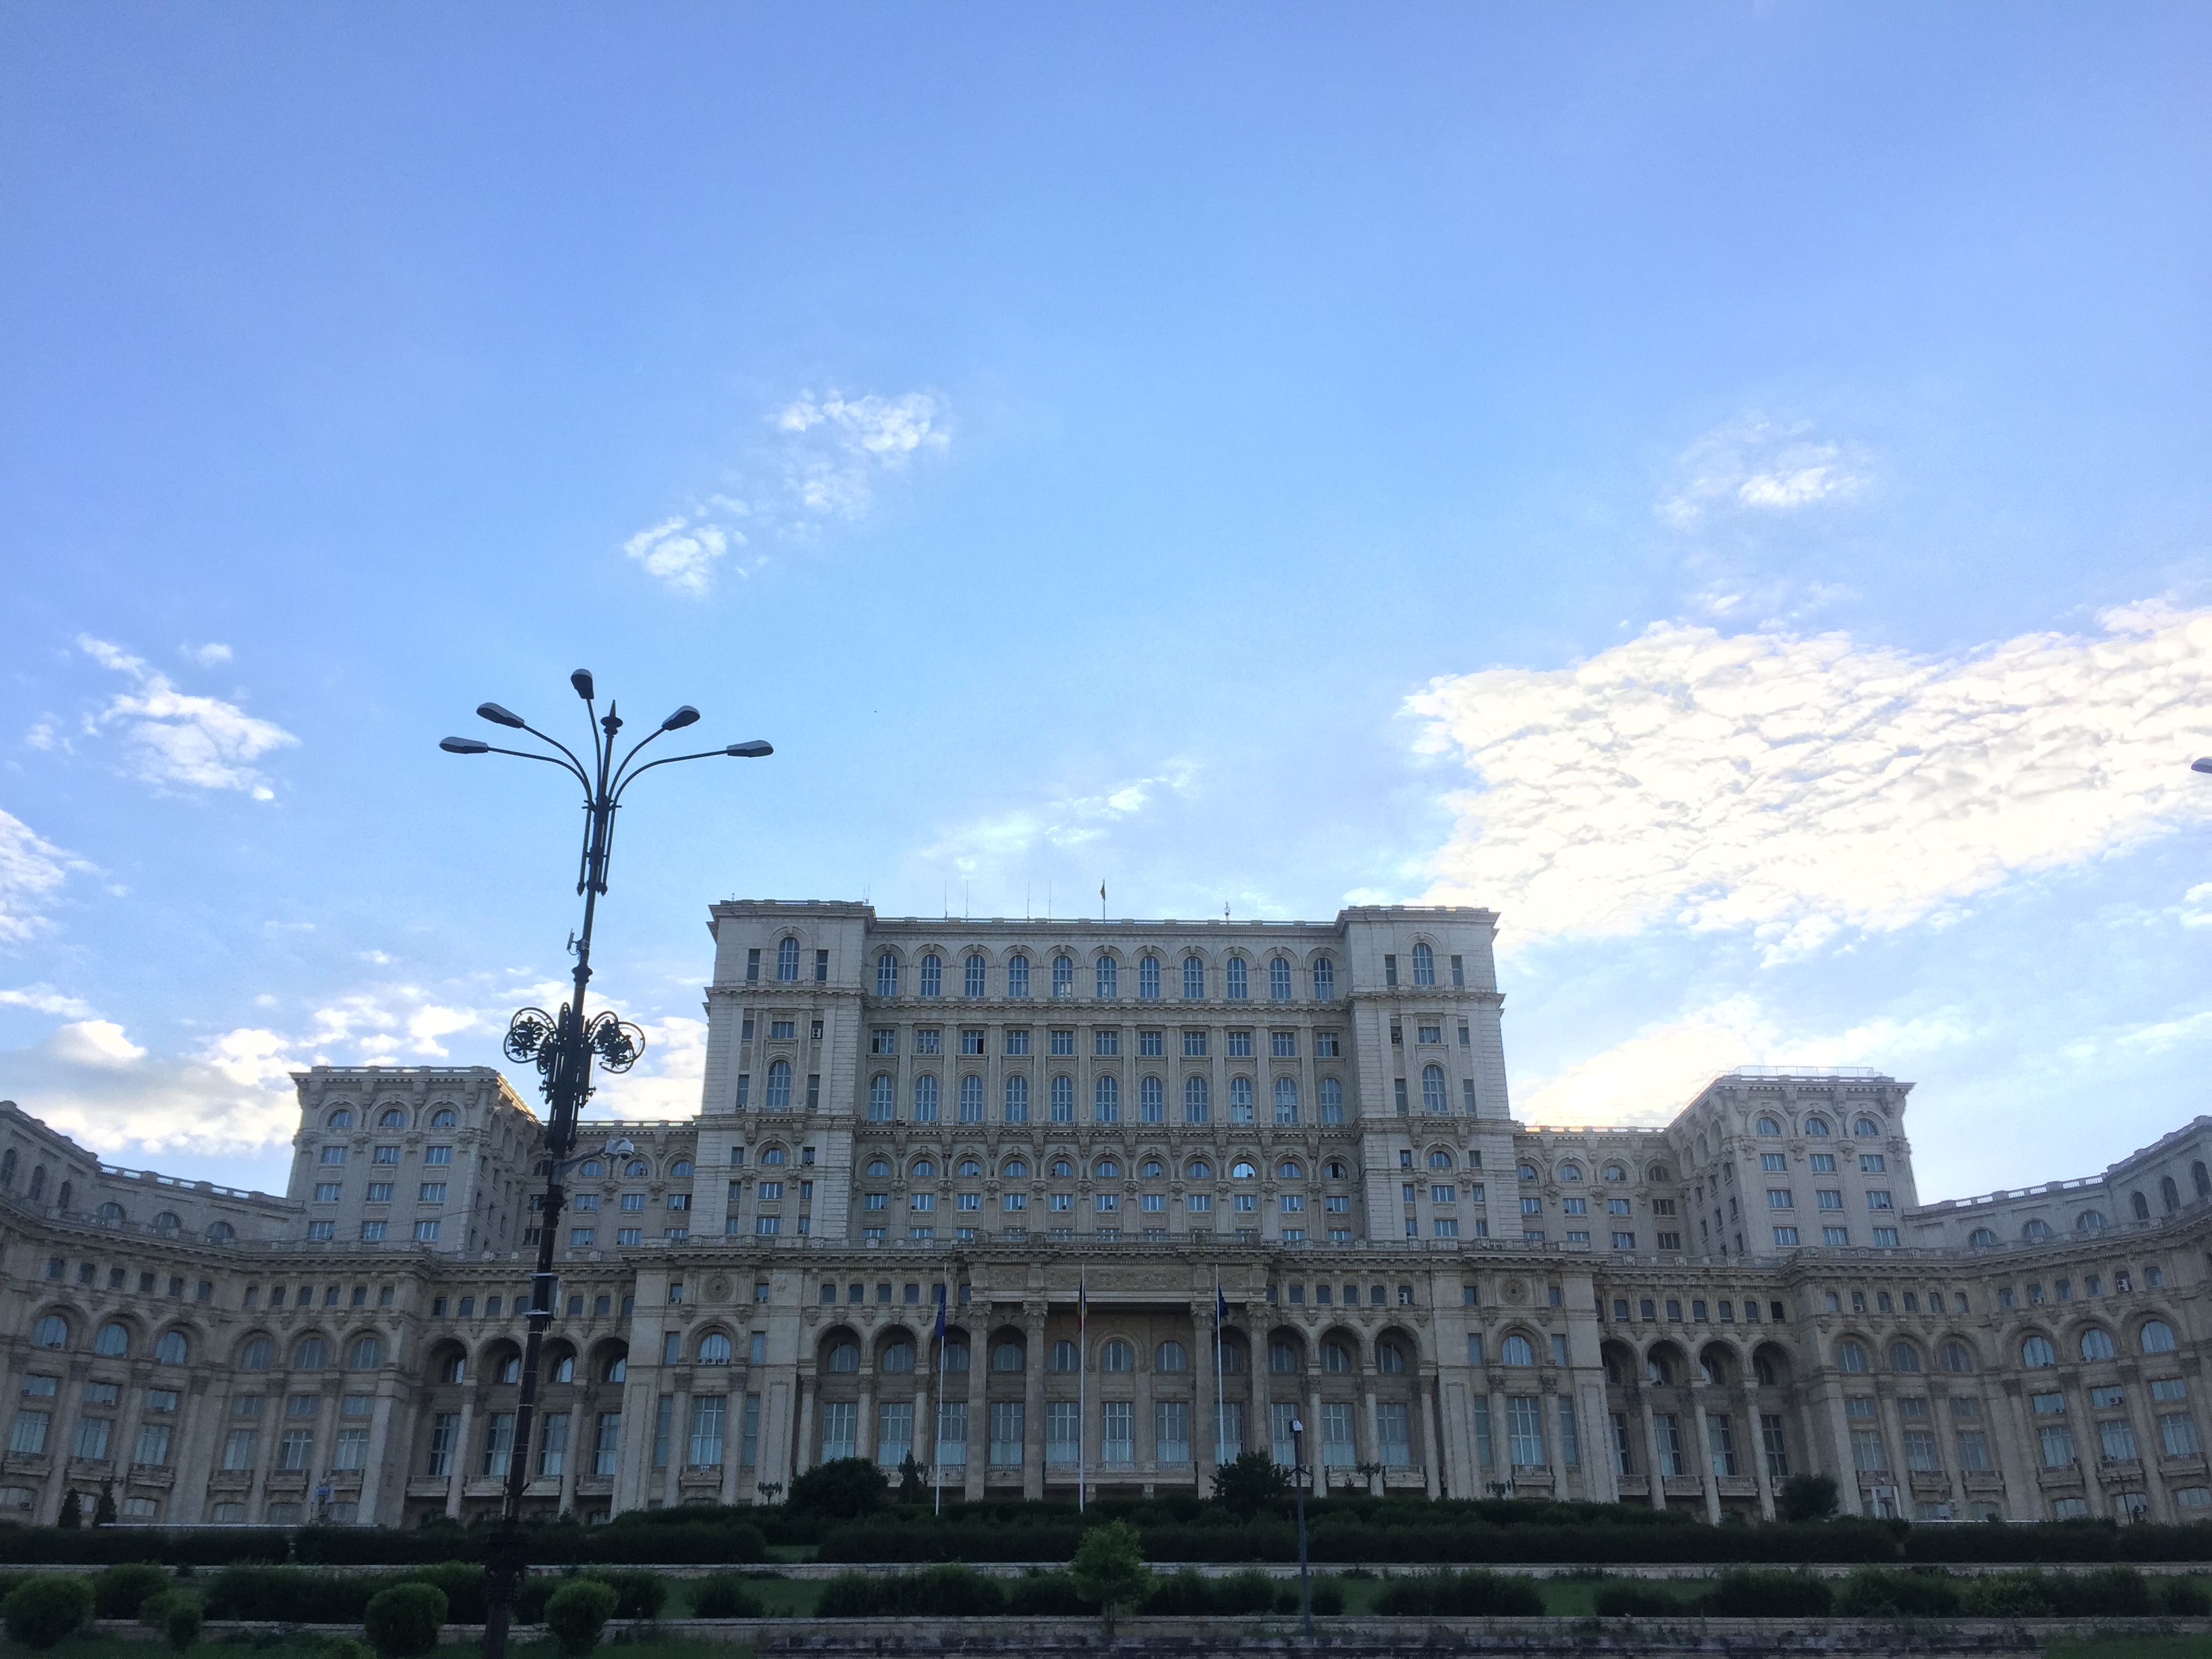 The grandiose Palace of the Parliament